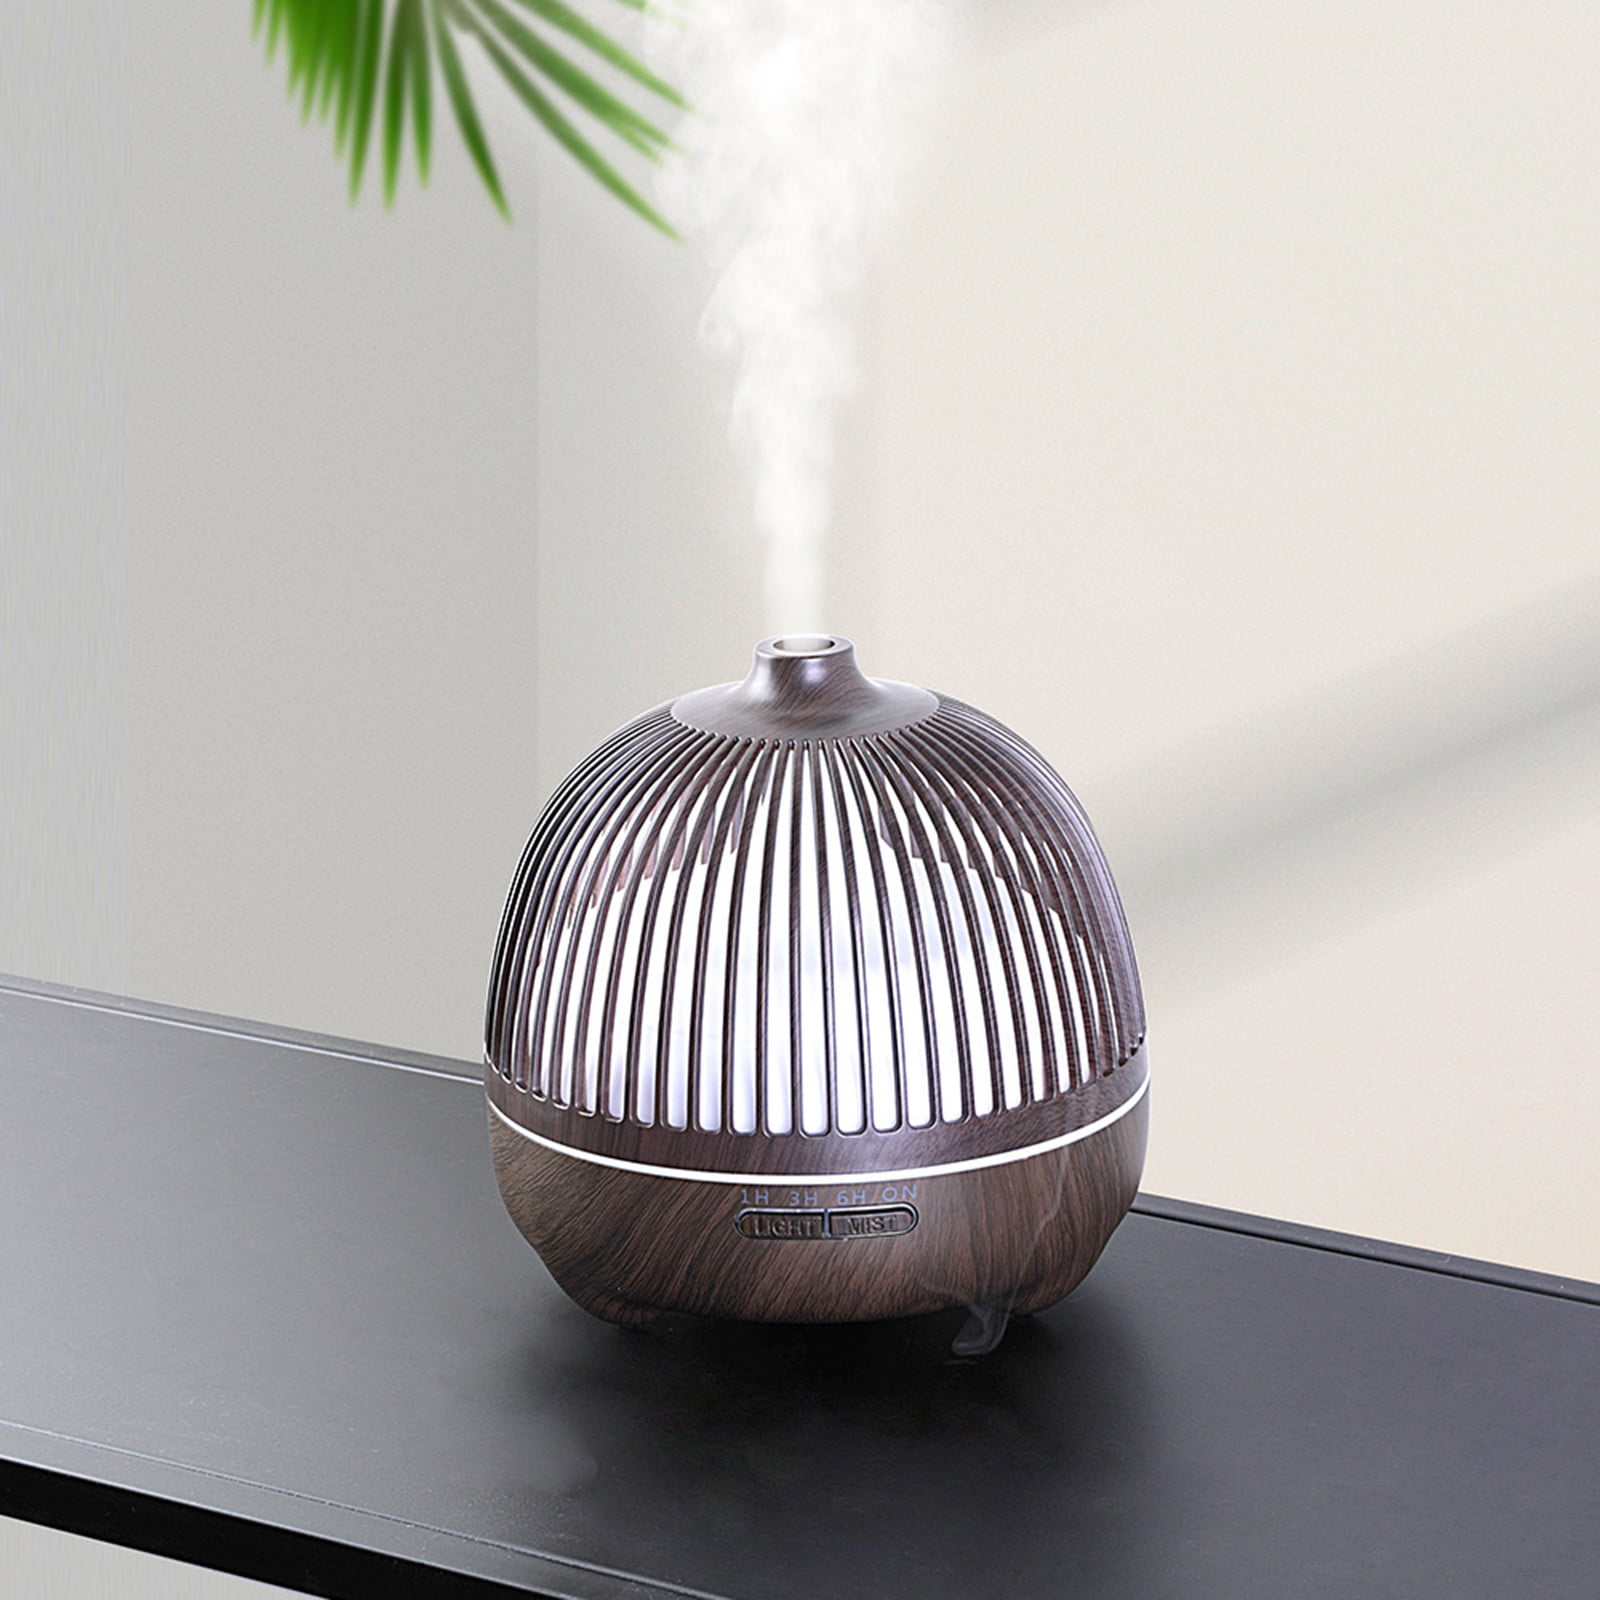 AromaTech™ Review - Premium Diffusers and Essential Oils for Home